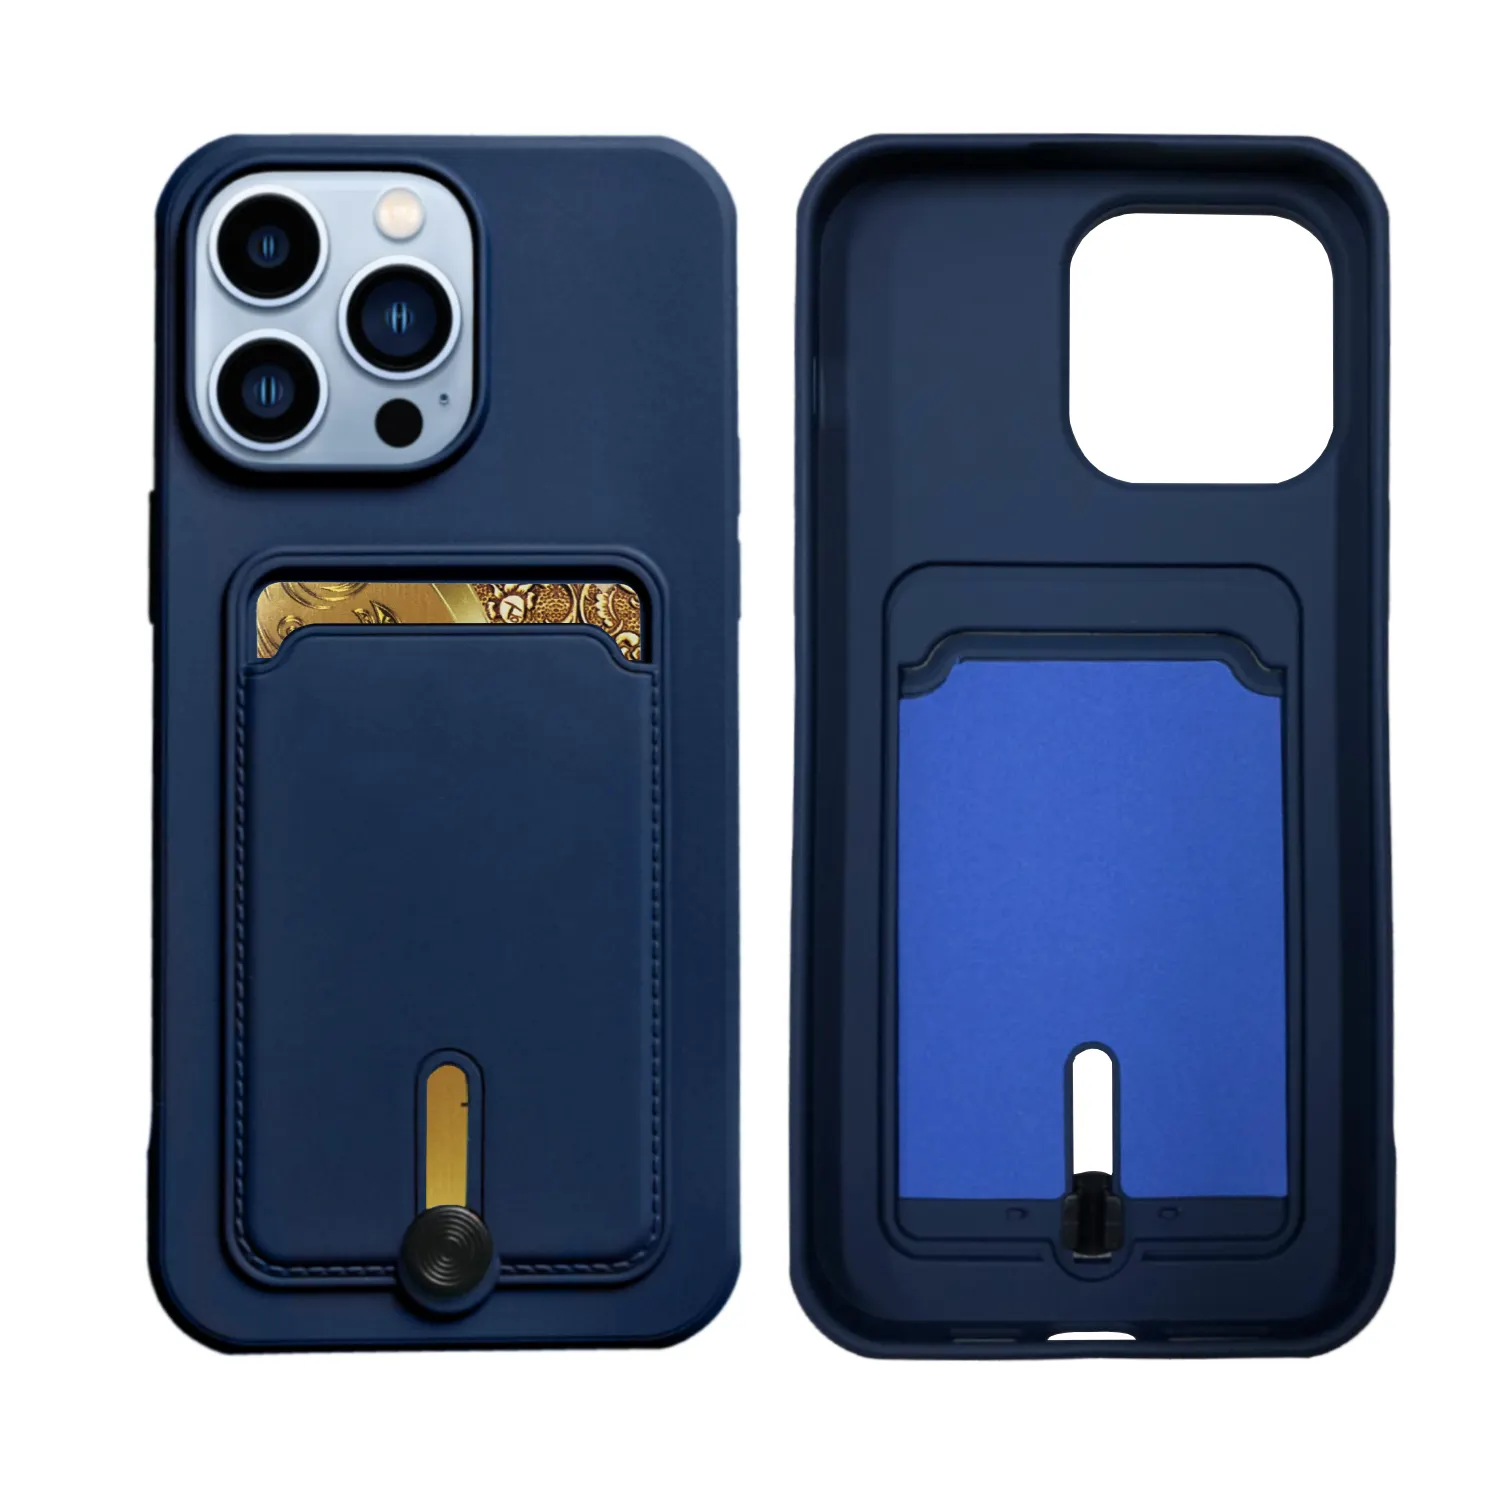 iphone 4 case card slot